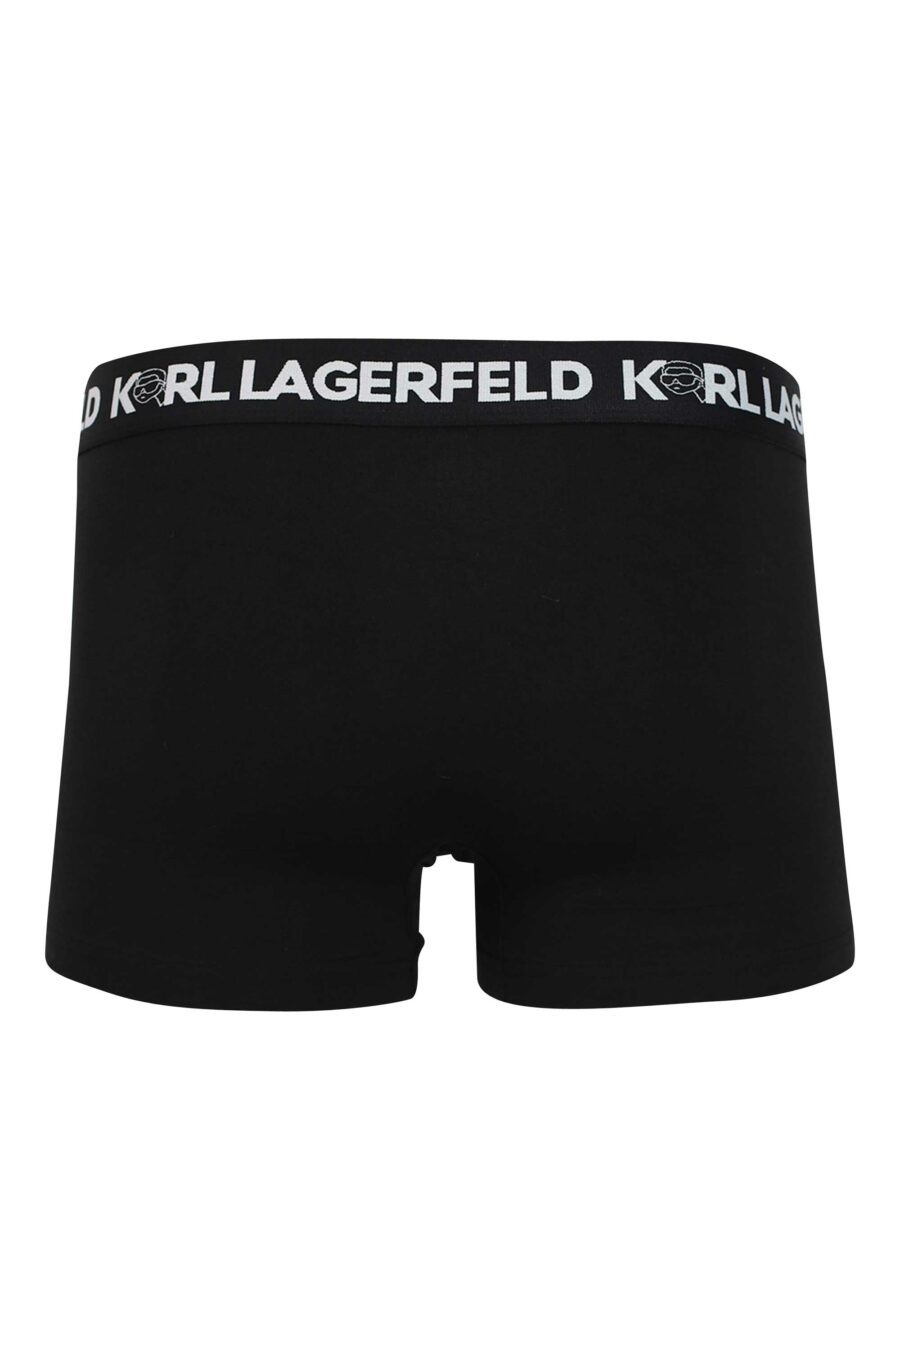 Pack of three black boxers with different "karl" prints - 8720744054580 2